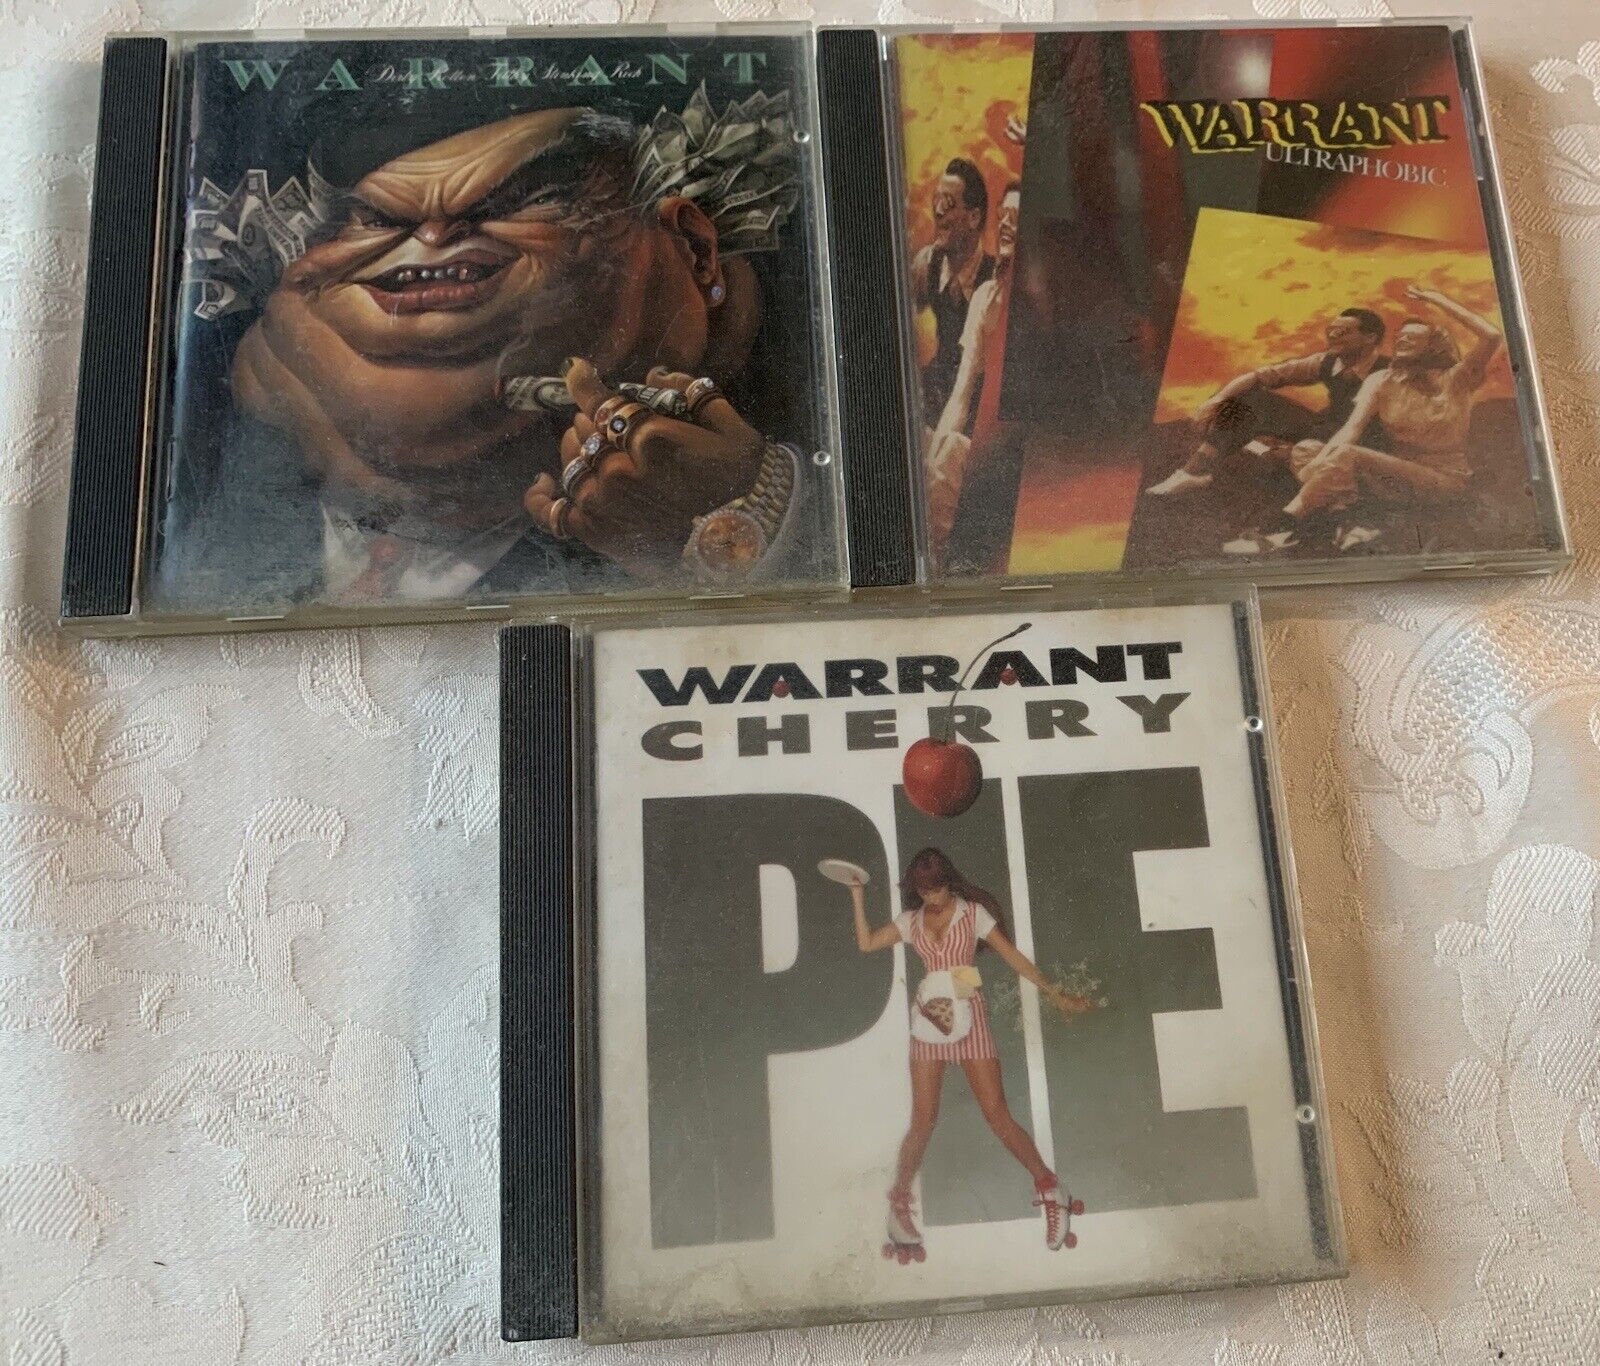 Warrant CD Lot (3): Cherry Pie, Untraphobic, Dirty Rotten Filthy Stinking Rich